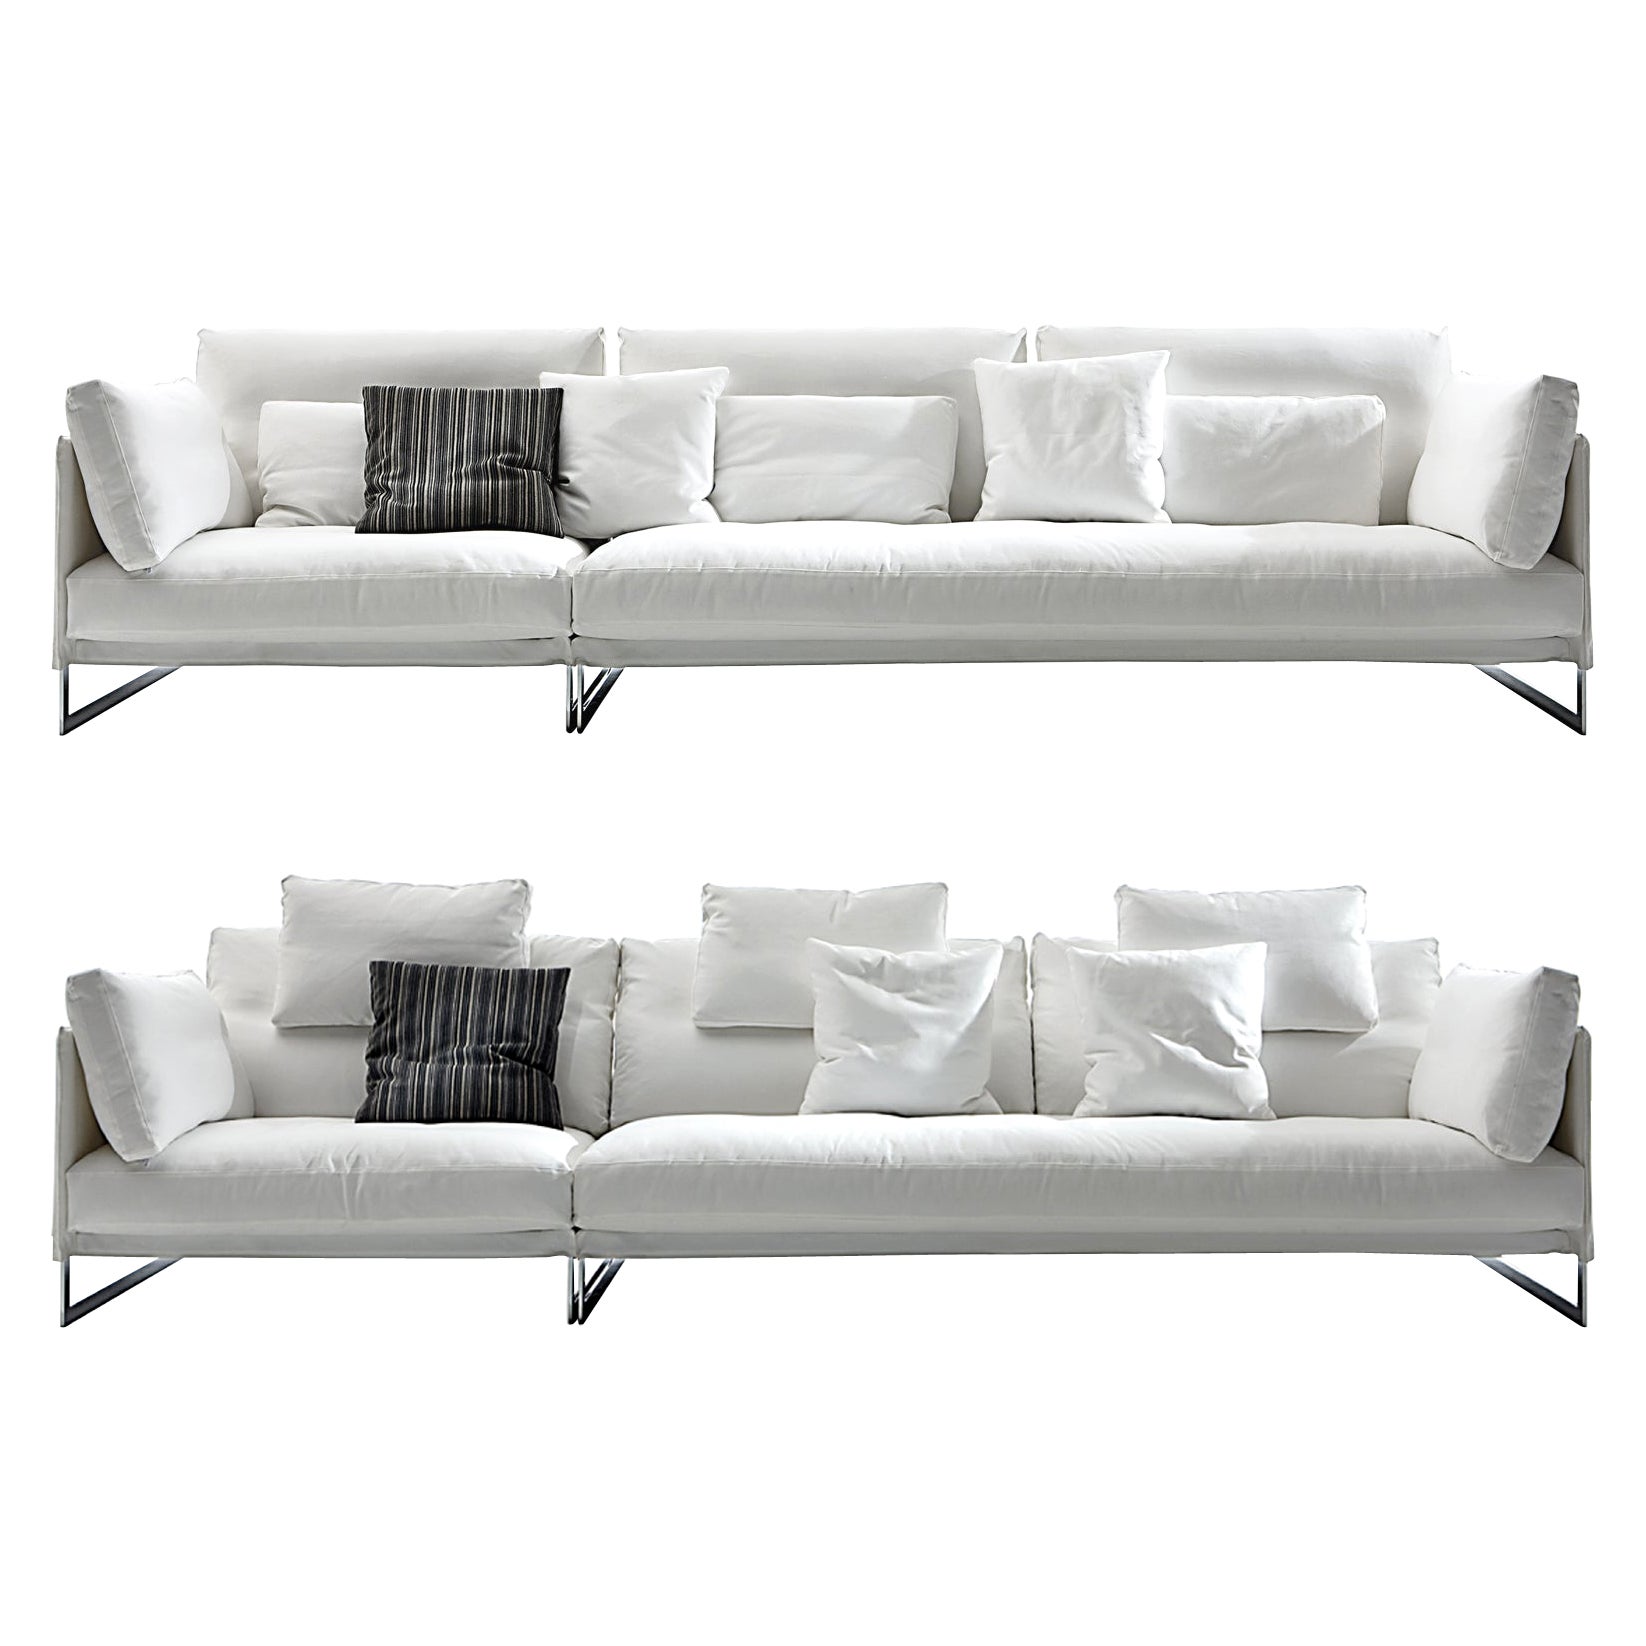 Livingston Large Sofa in Lusso White Upholstery with Chrome by Giuseppe Viganò For Sale